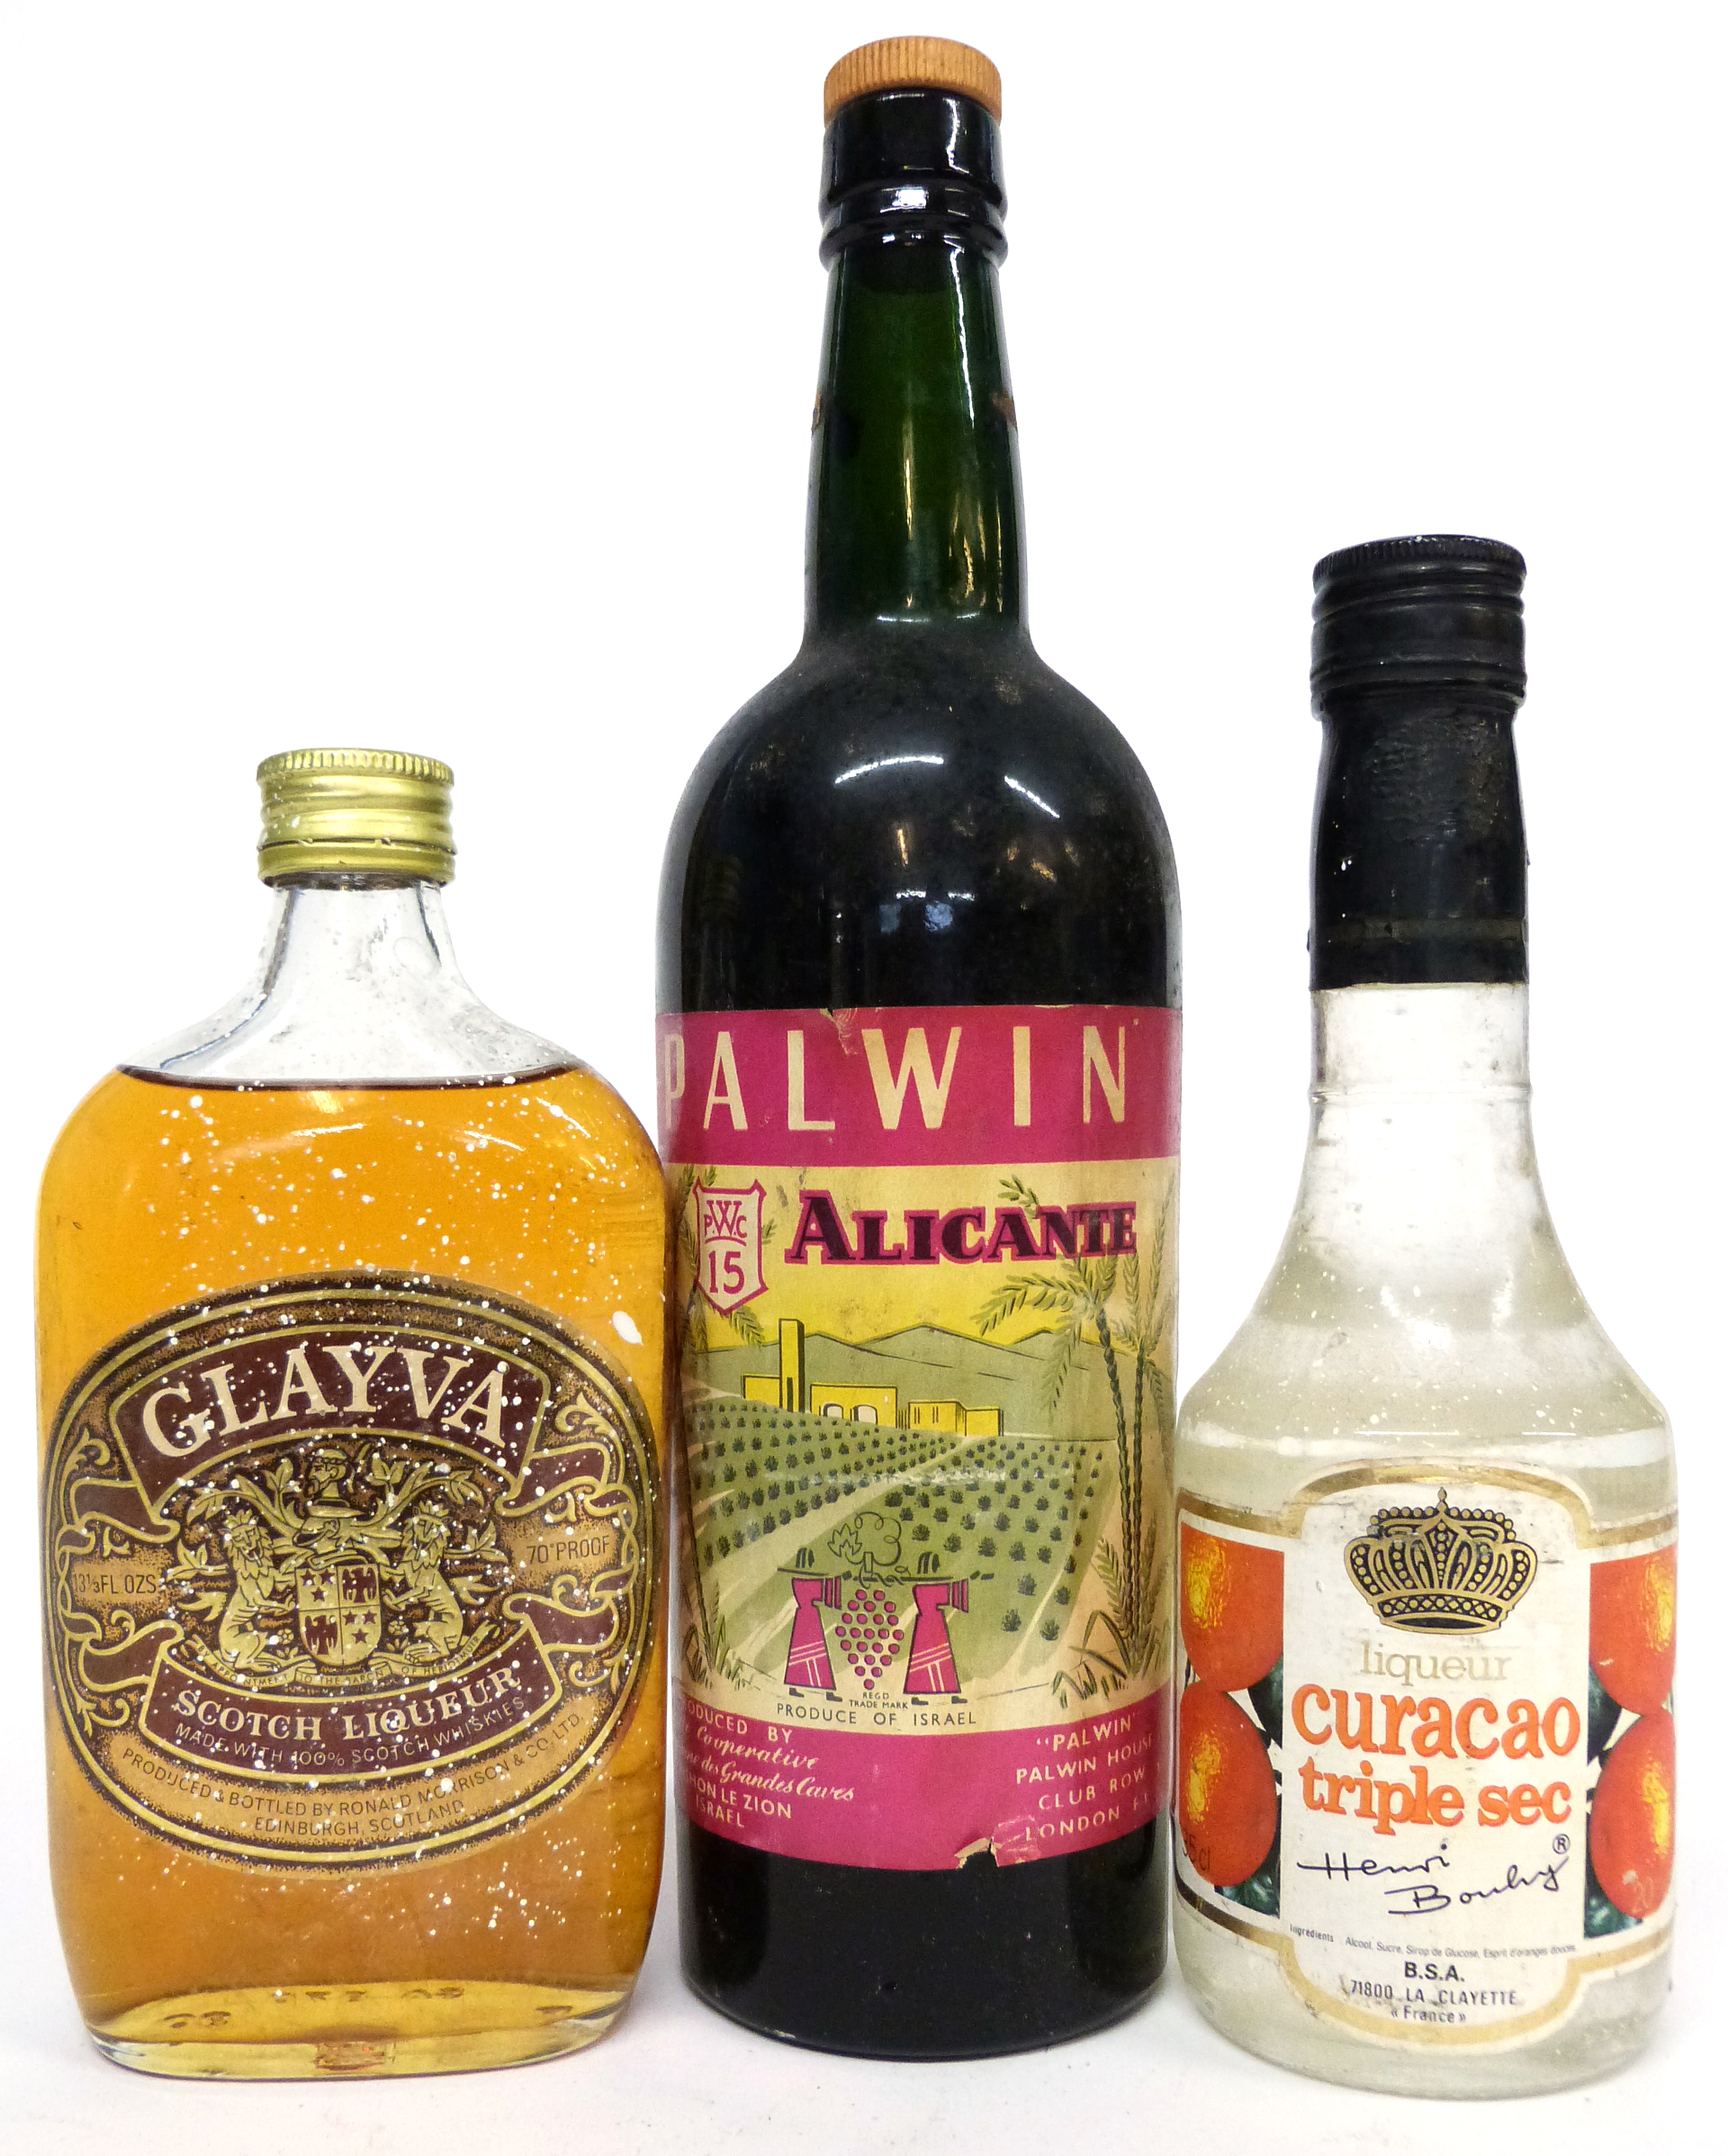 Mixed Lot: one bottle of Palwin Alicante together with half bottle of Glayva Scotch Liqueur (3)